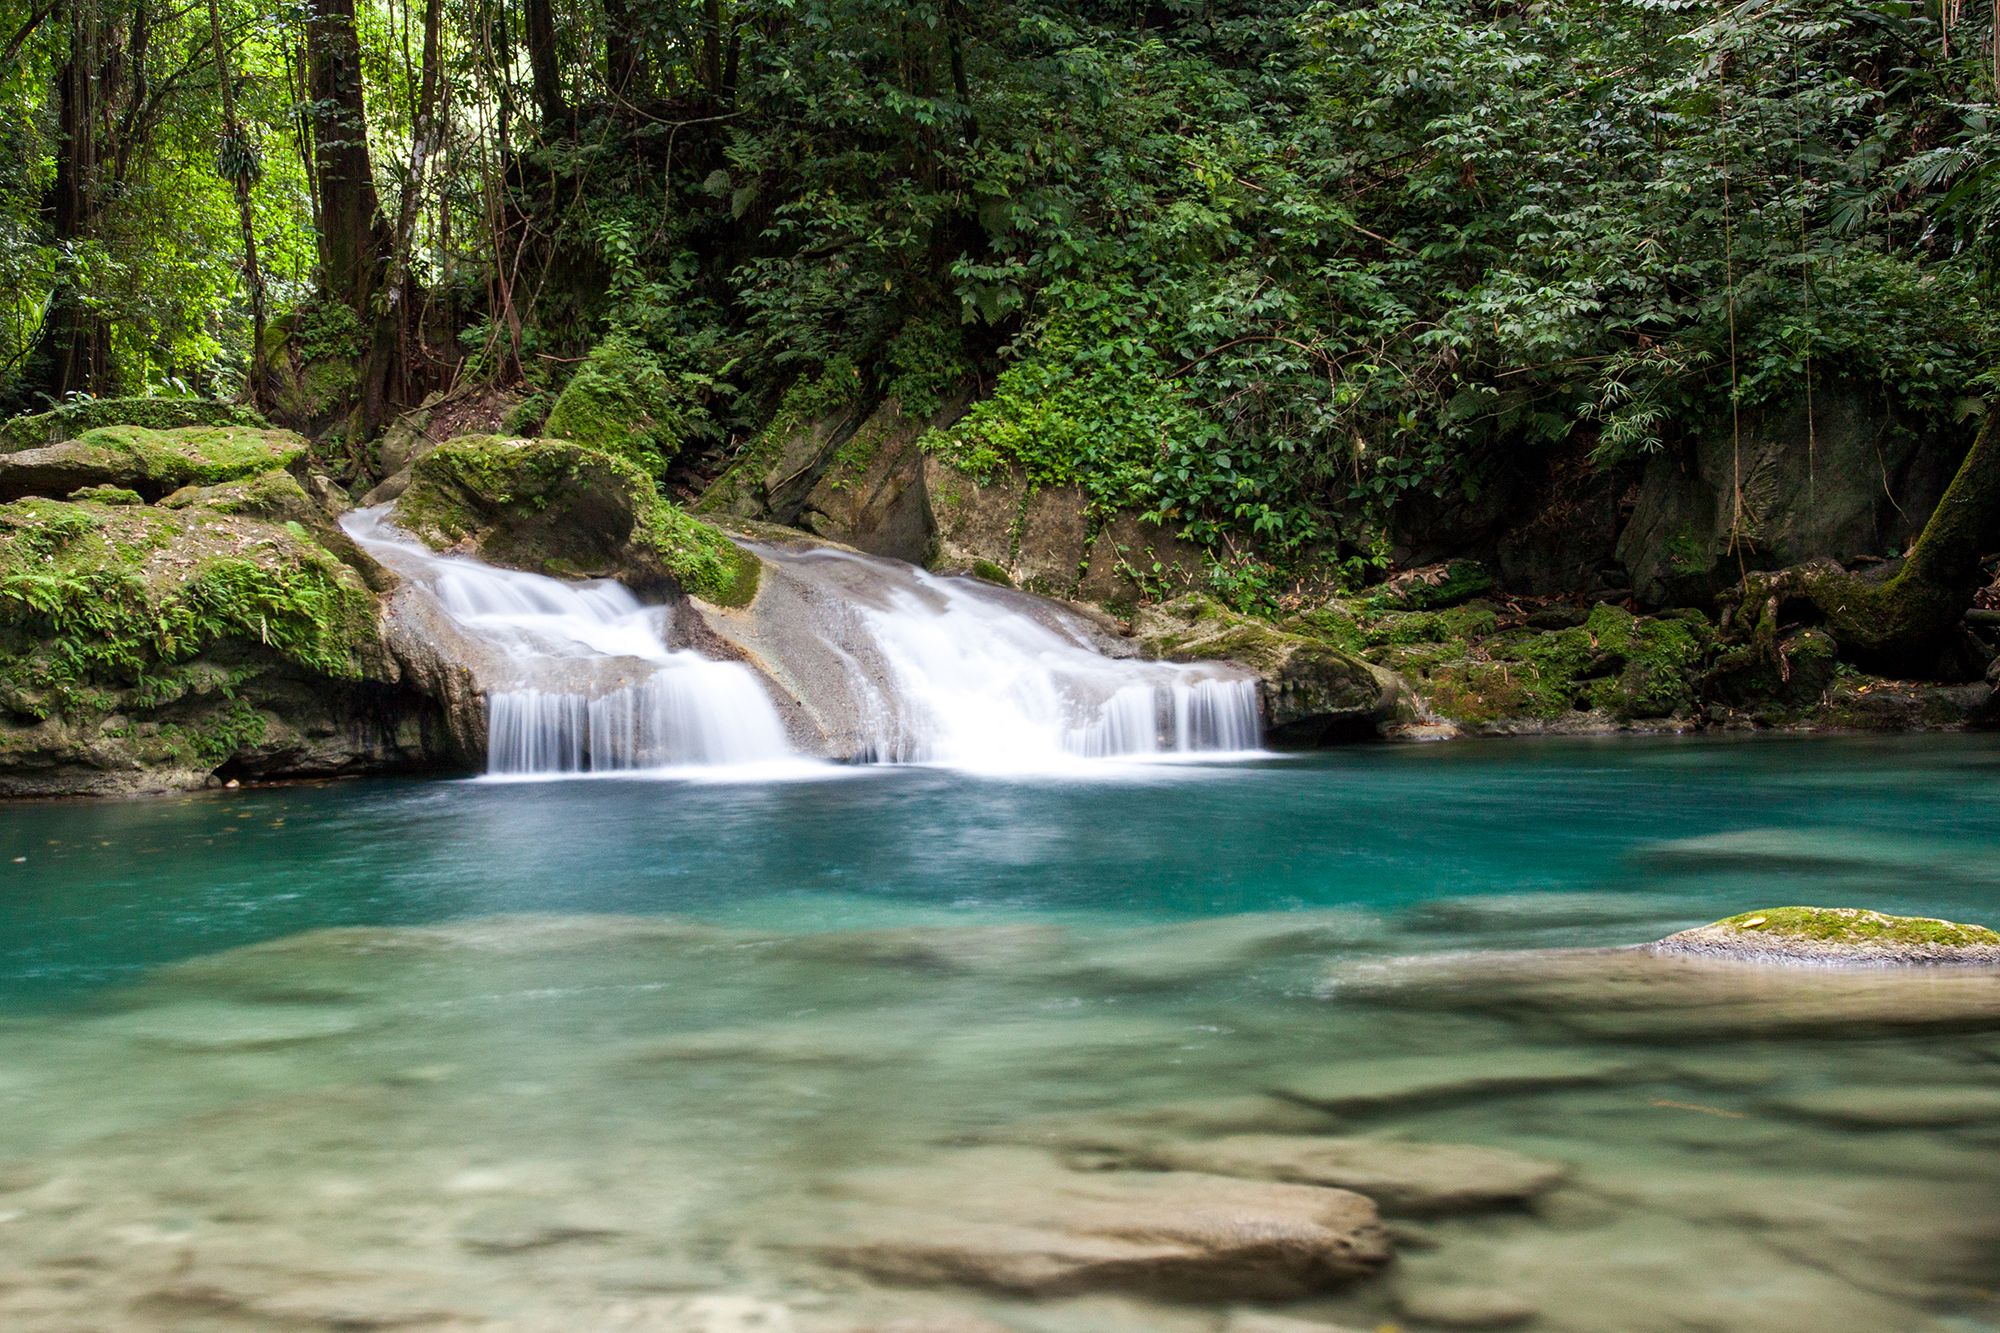 Waterfalls, Ponds & Even An Aviary — Here’s Why You Should Visit Jamaica’s Turtle River Falls!